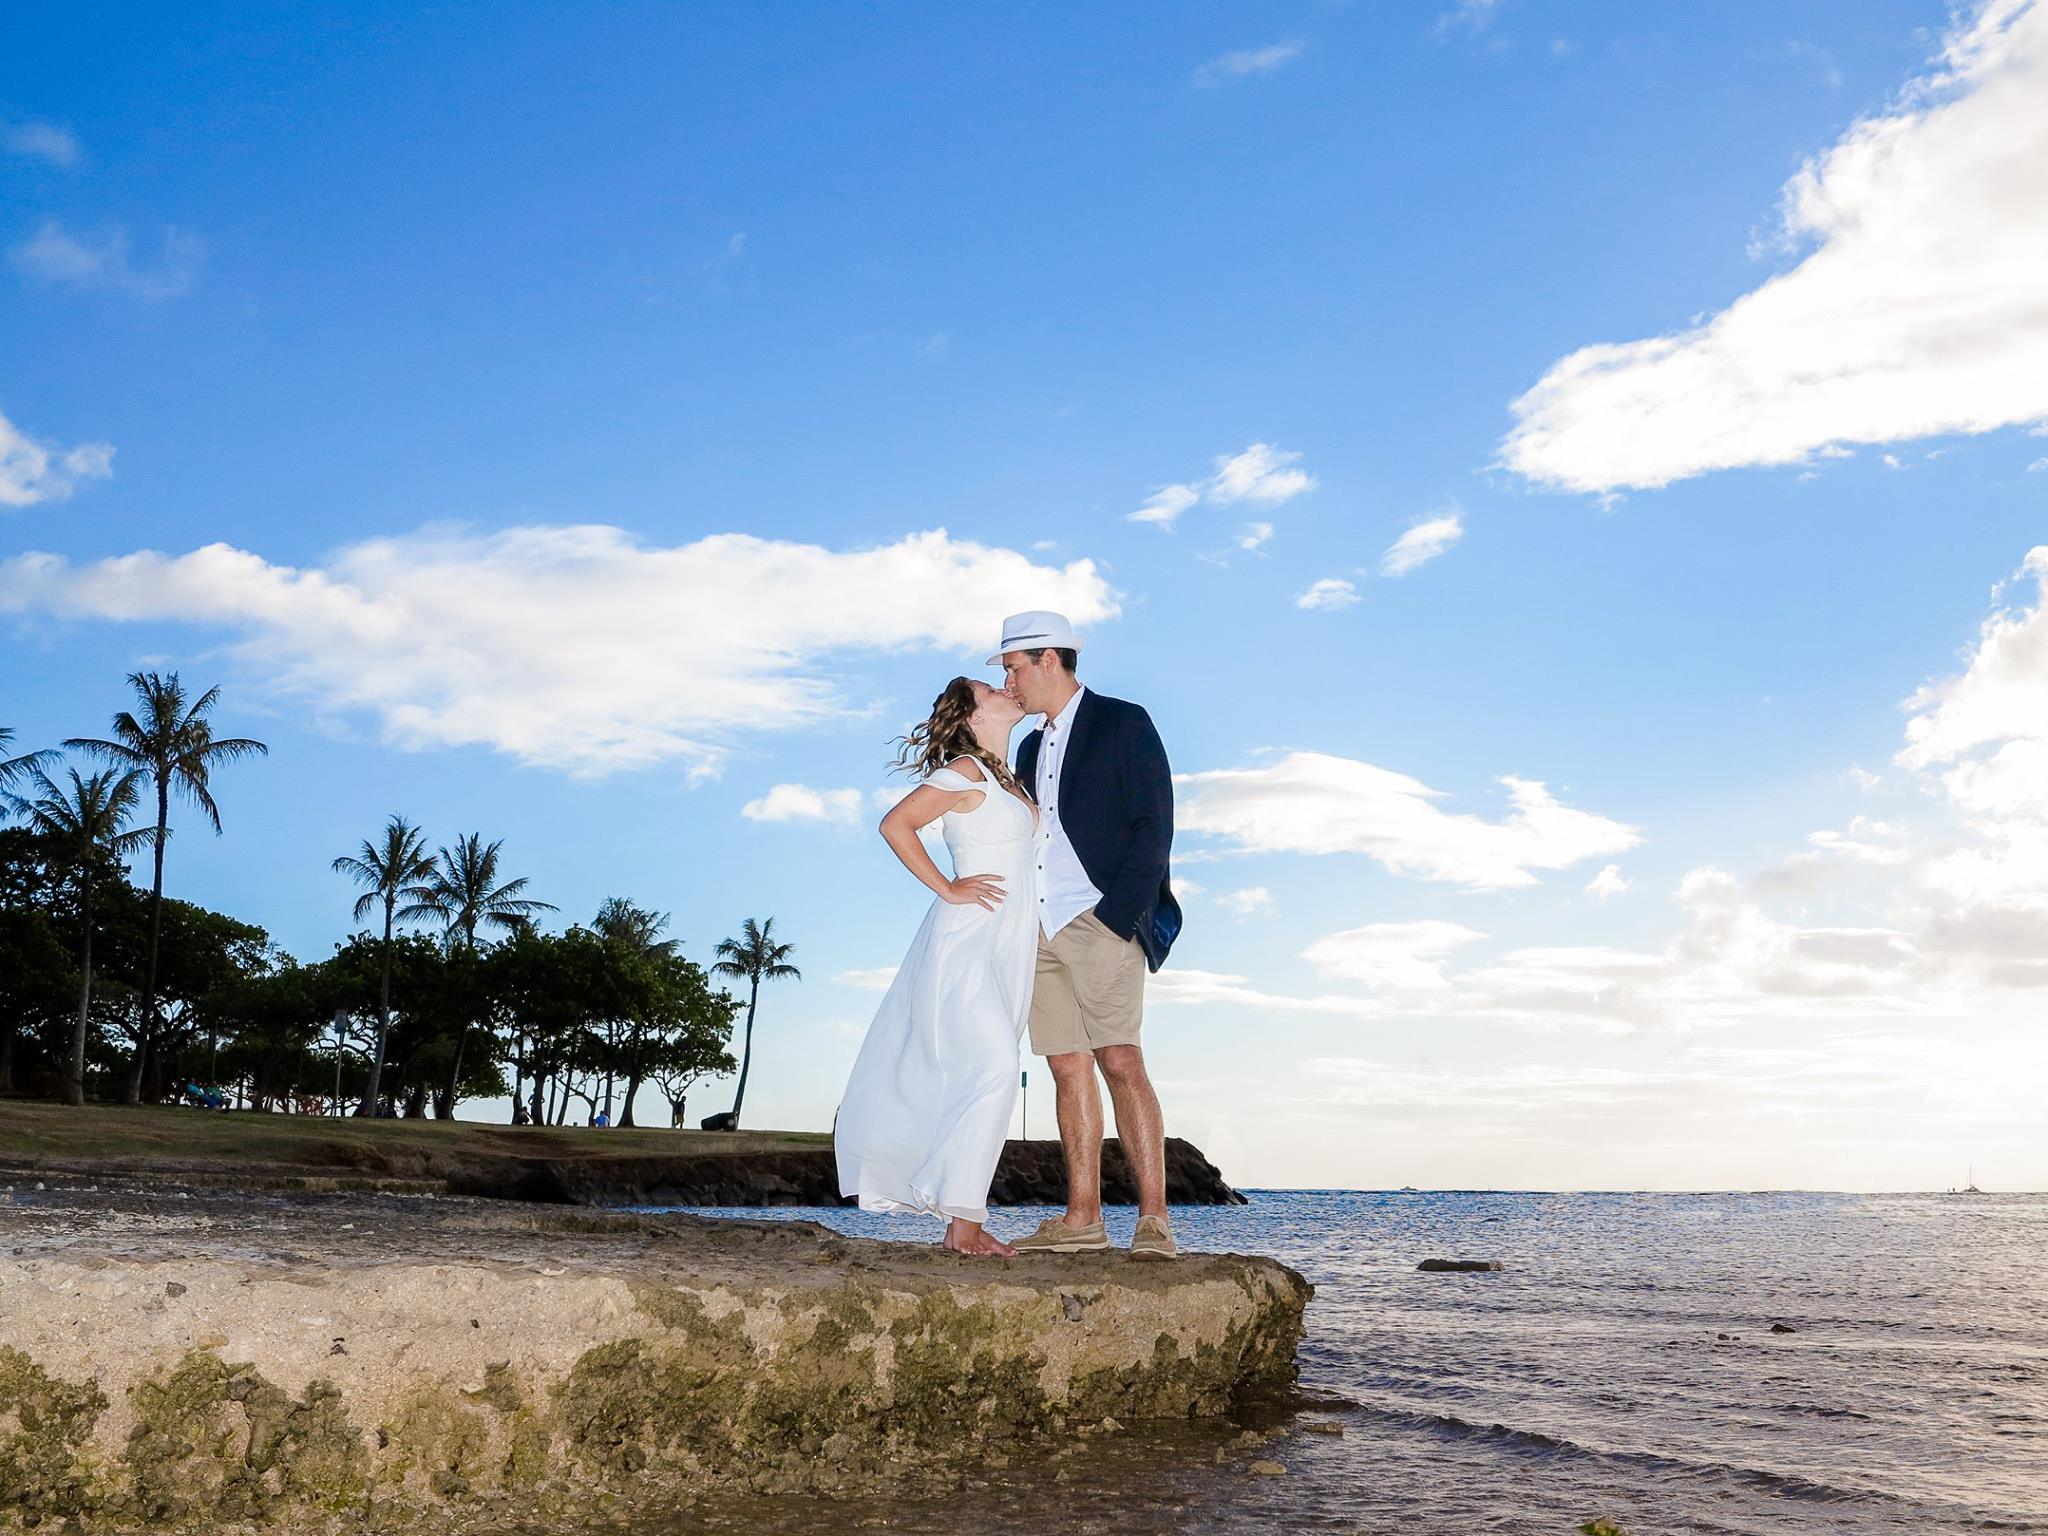 Five Tips To Having The Perfect Beach Wedding In Hawaii